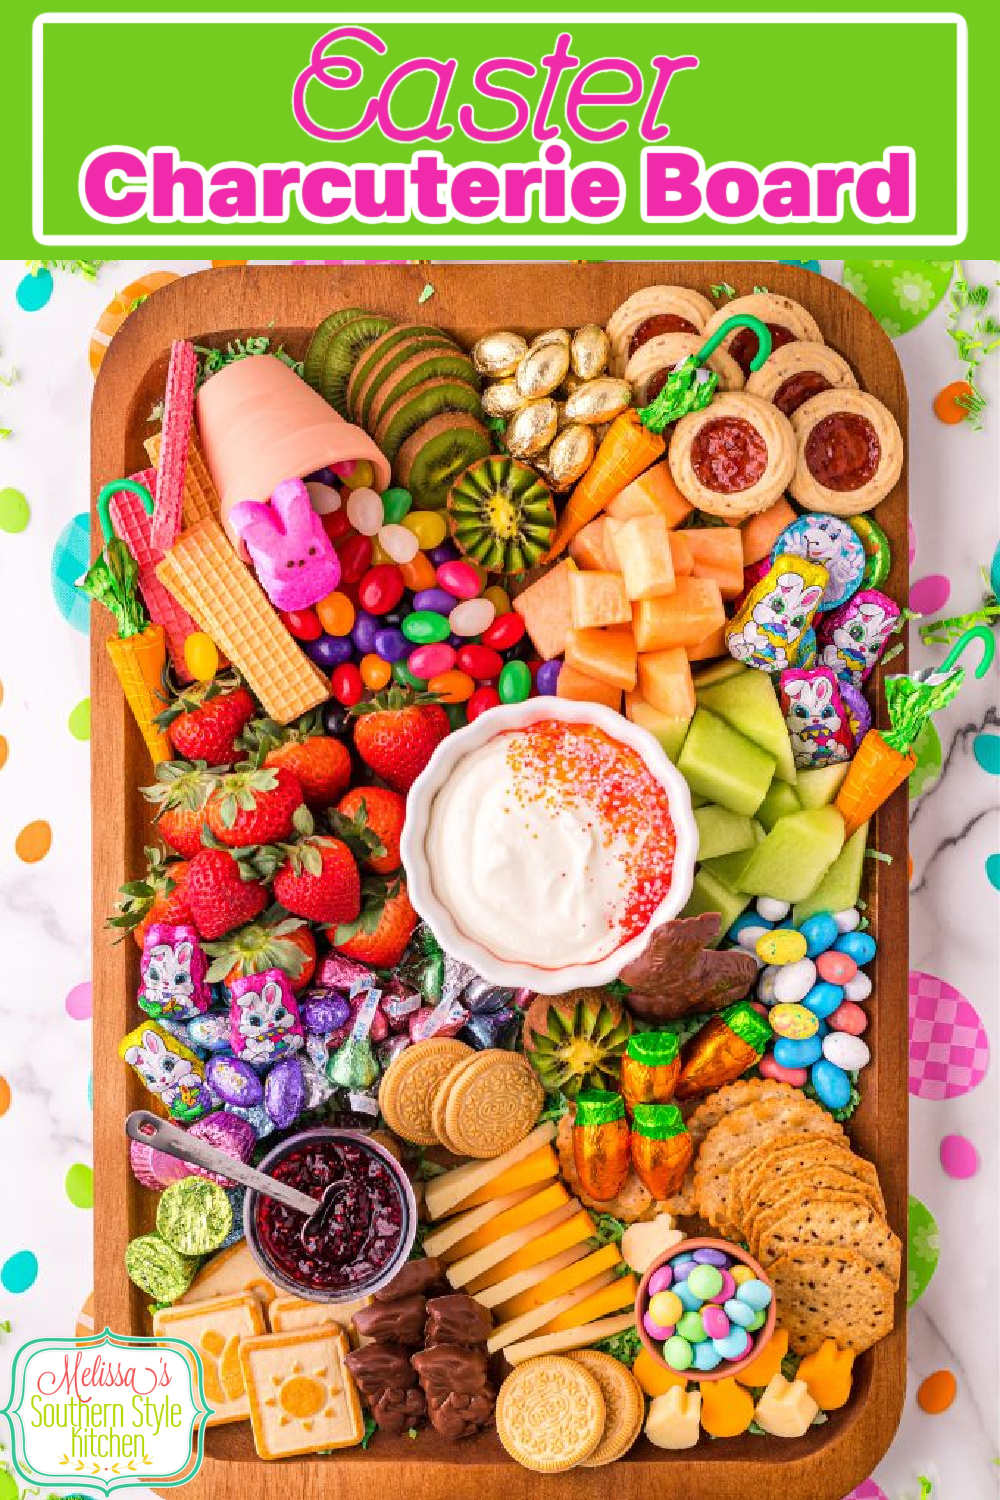 Fill this Easter Charcuterie Board with sweet and salty snacks perfect for your Easter gathering #easter #easterrecipes #desserts #charcuterie #eastercharcuterie #dessertboards #butterboard #dessertrecipes via @melissasssk